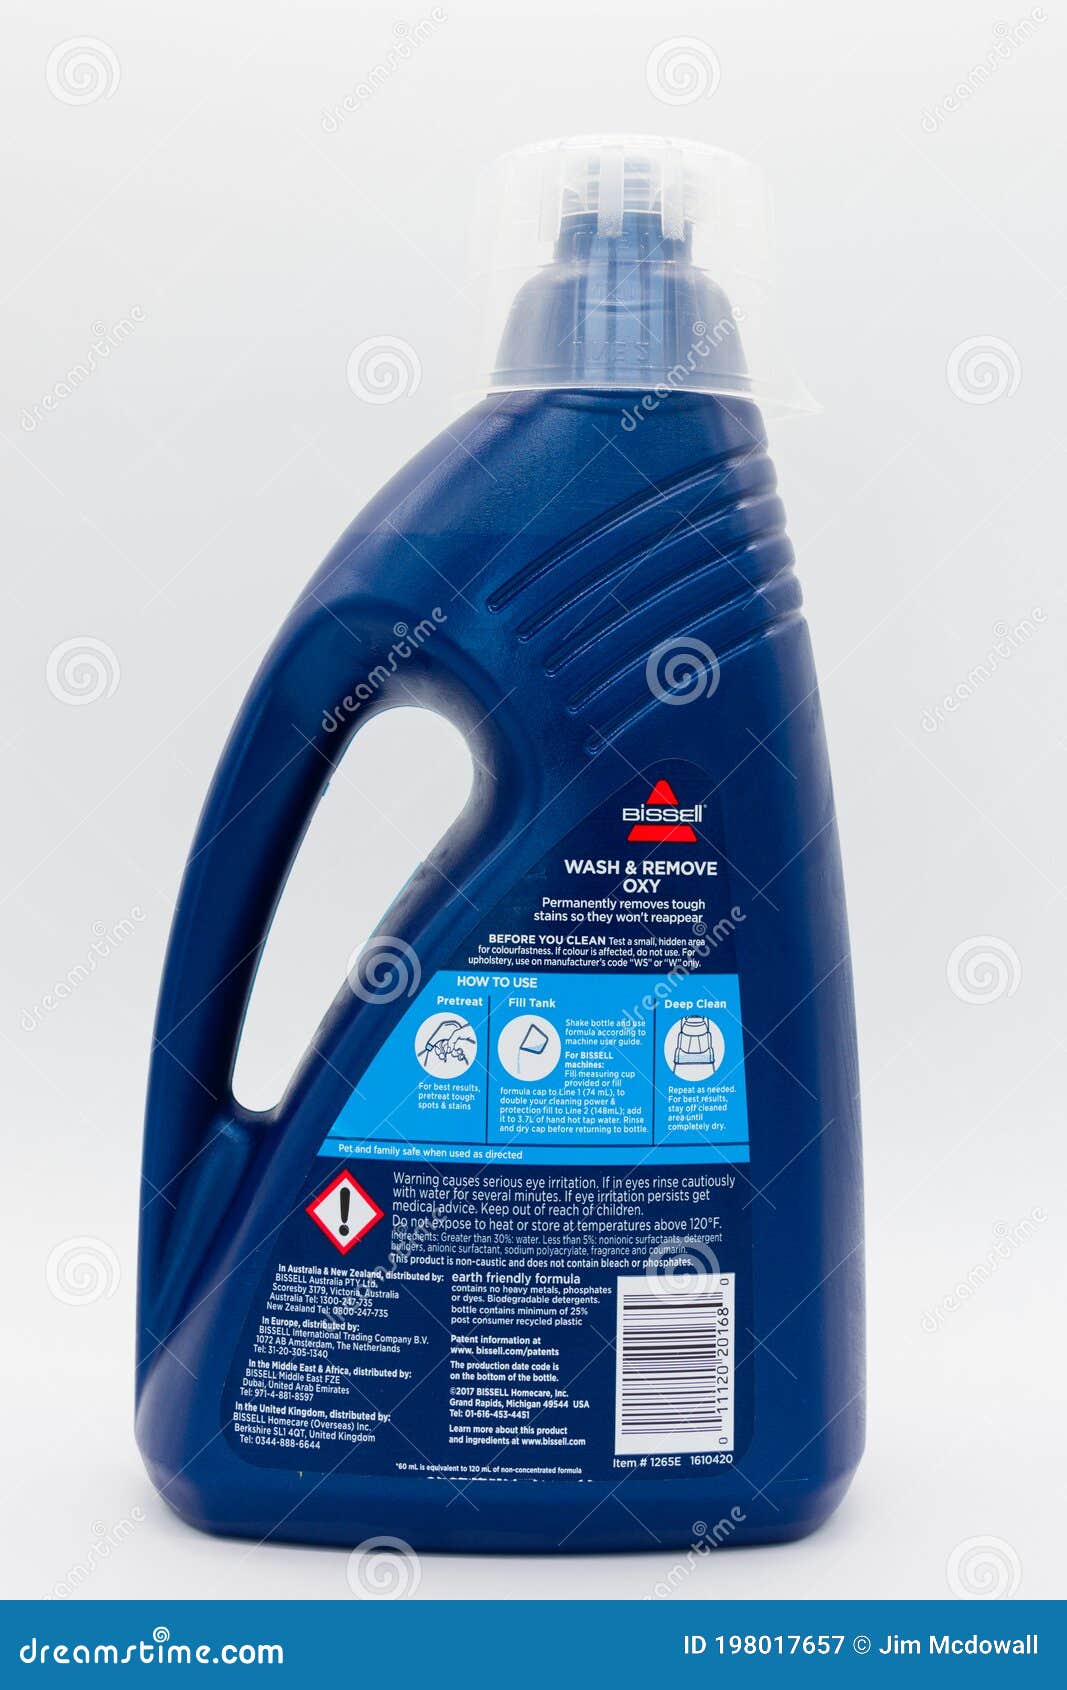 Bissell Branded Wash and Remove Carpet Cleaner Rear Label